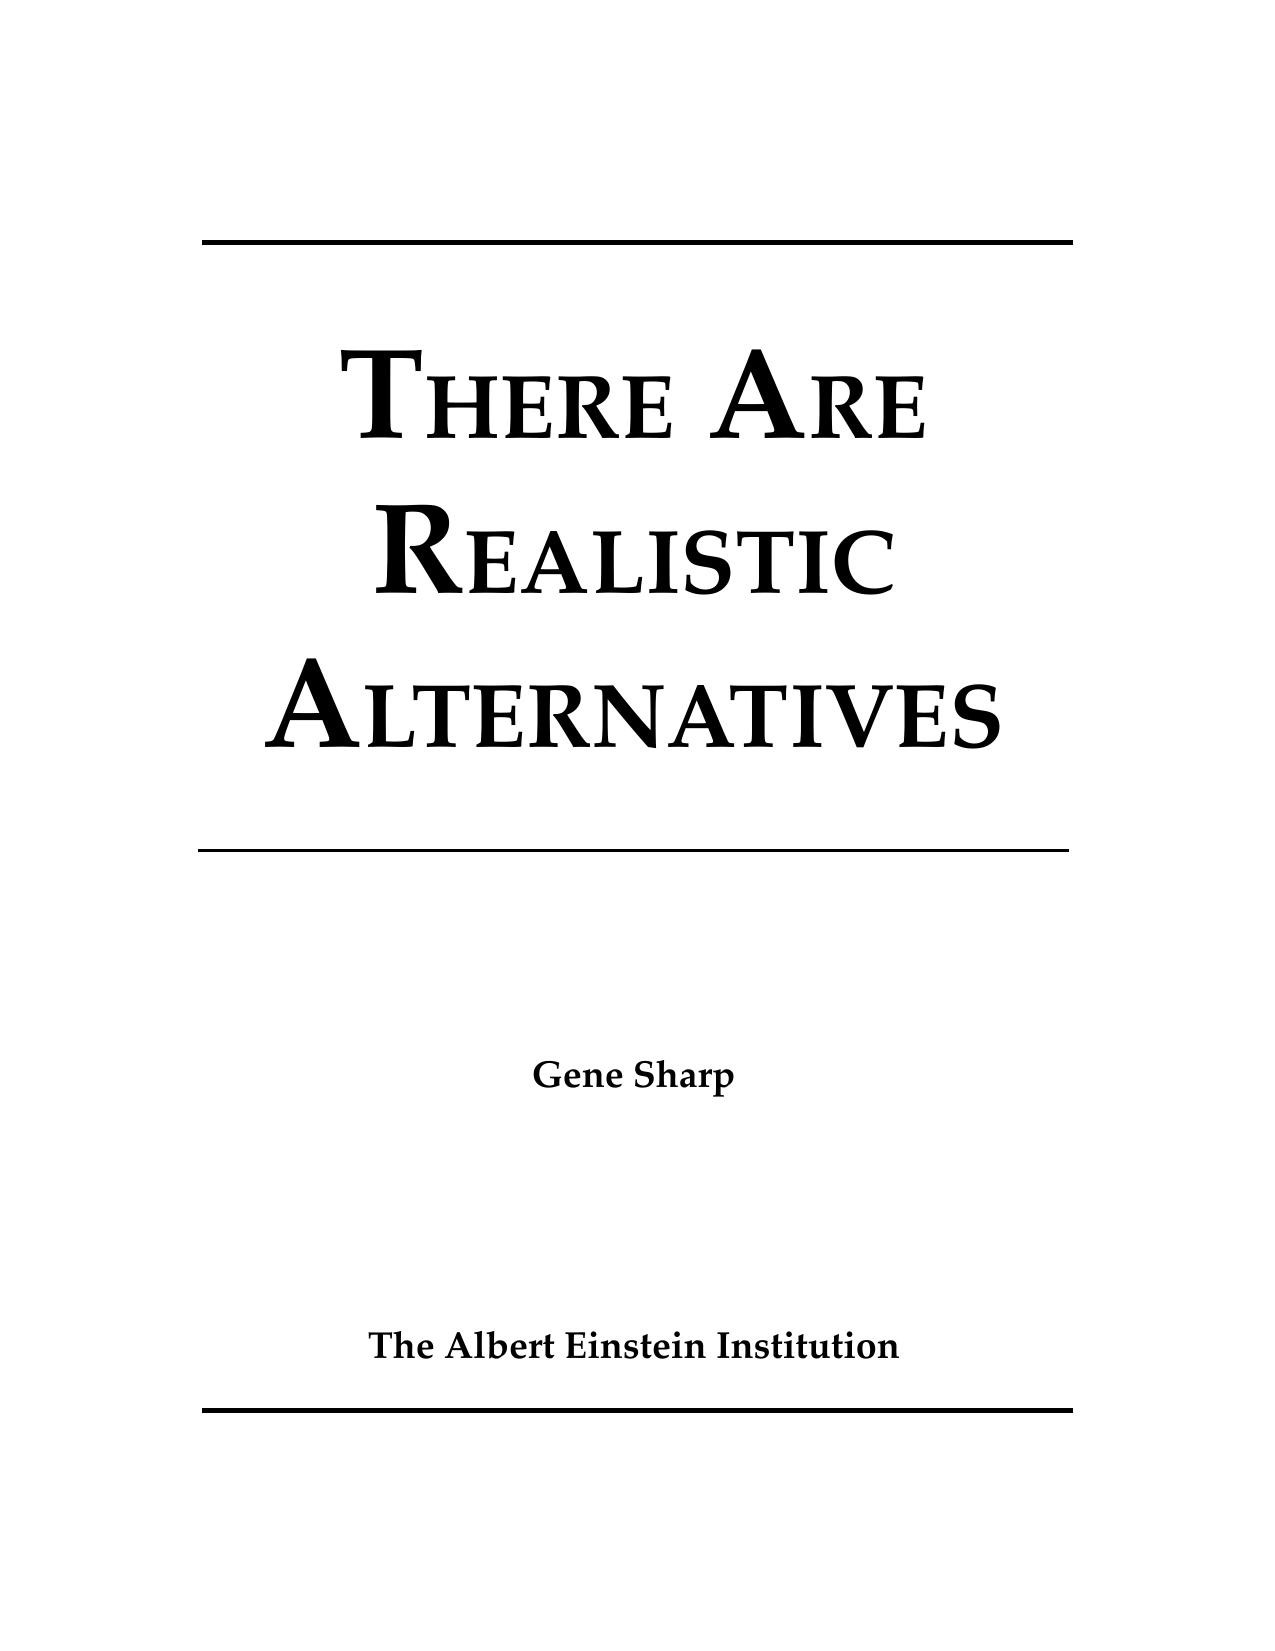 There Are Realstic Alternatives (2003) by Gene Sharp